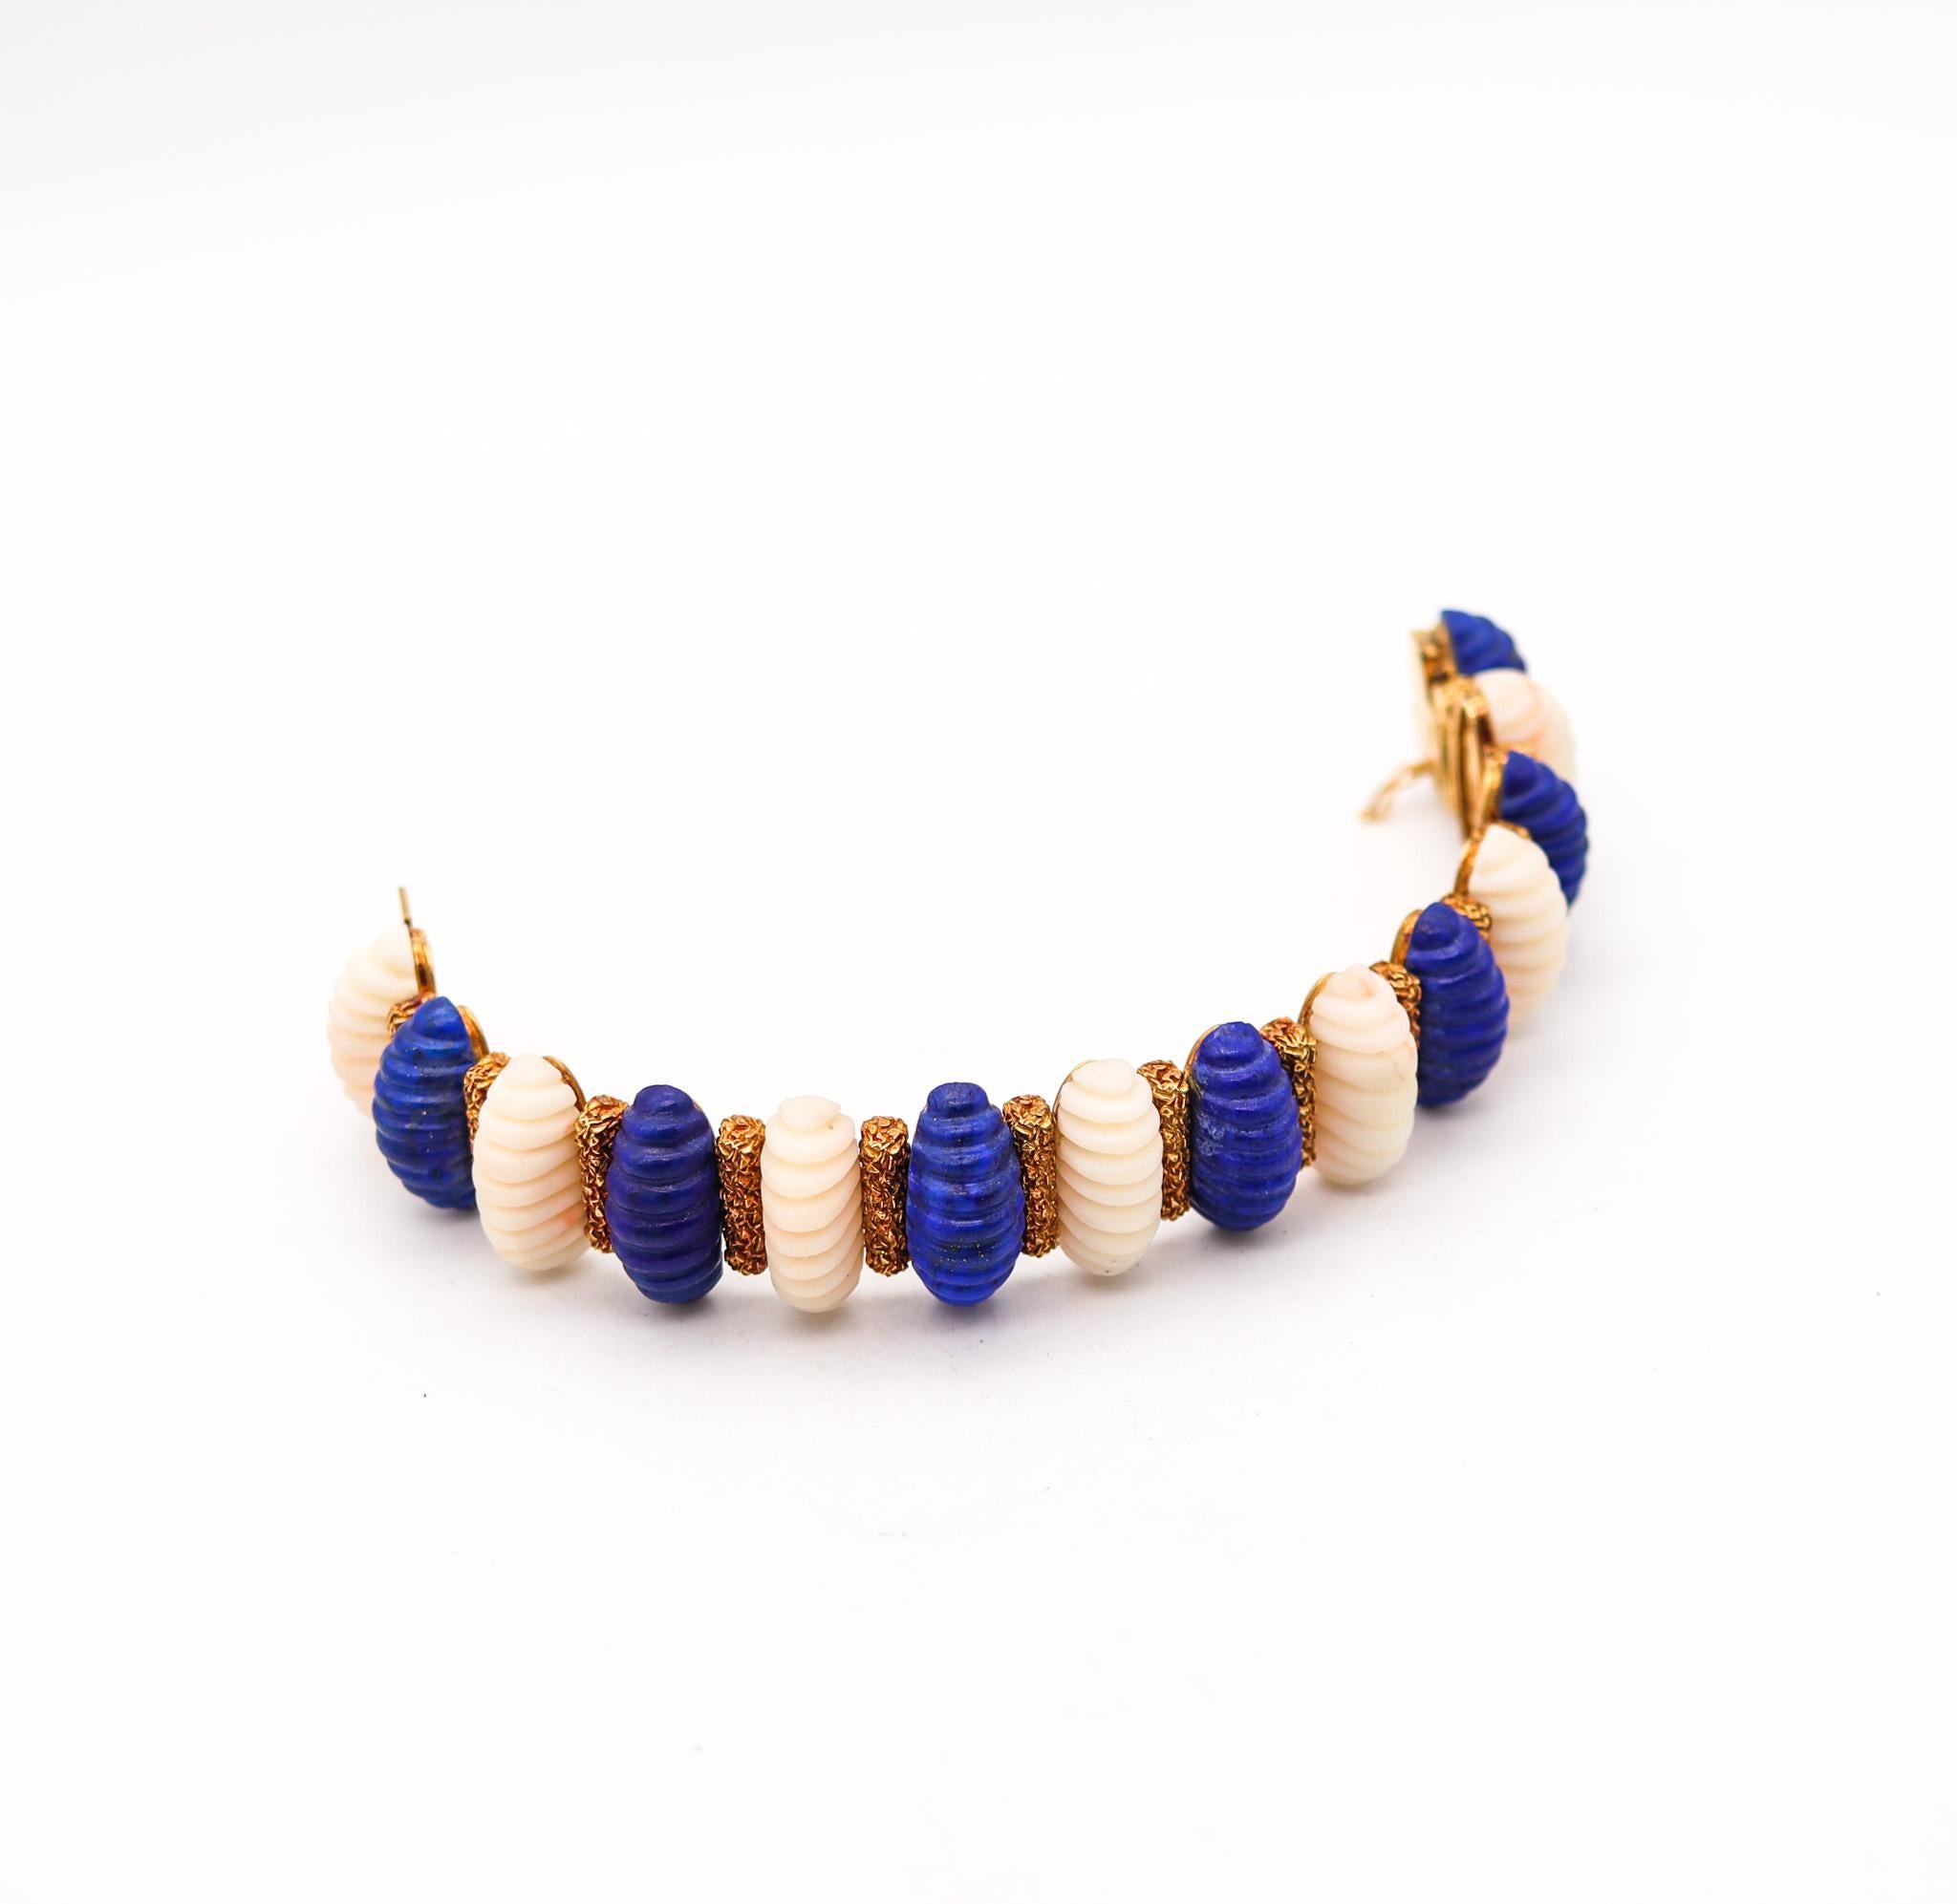 Women's French 1960 Retro modernist Bracelet In 18Kt Gold With 77 Ctw In Lapis And Coral For Sale